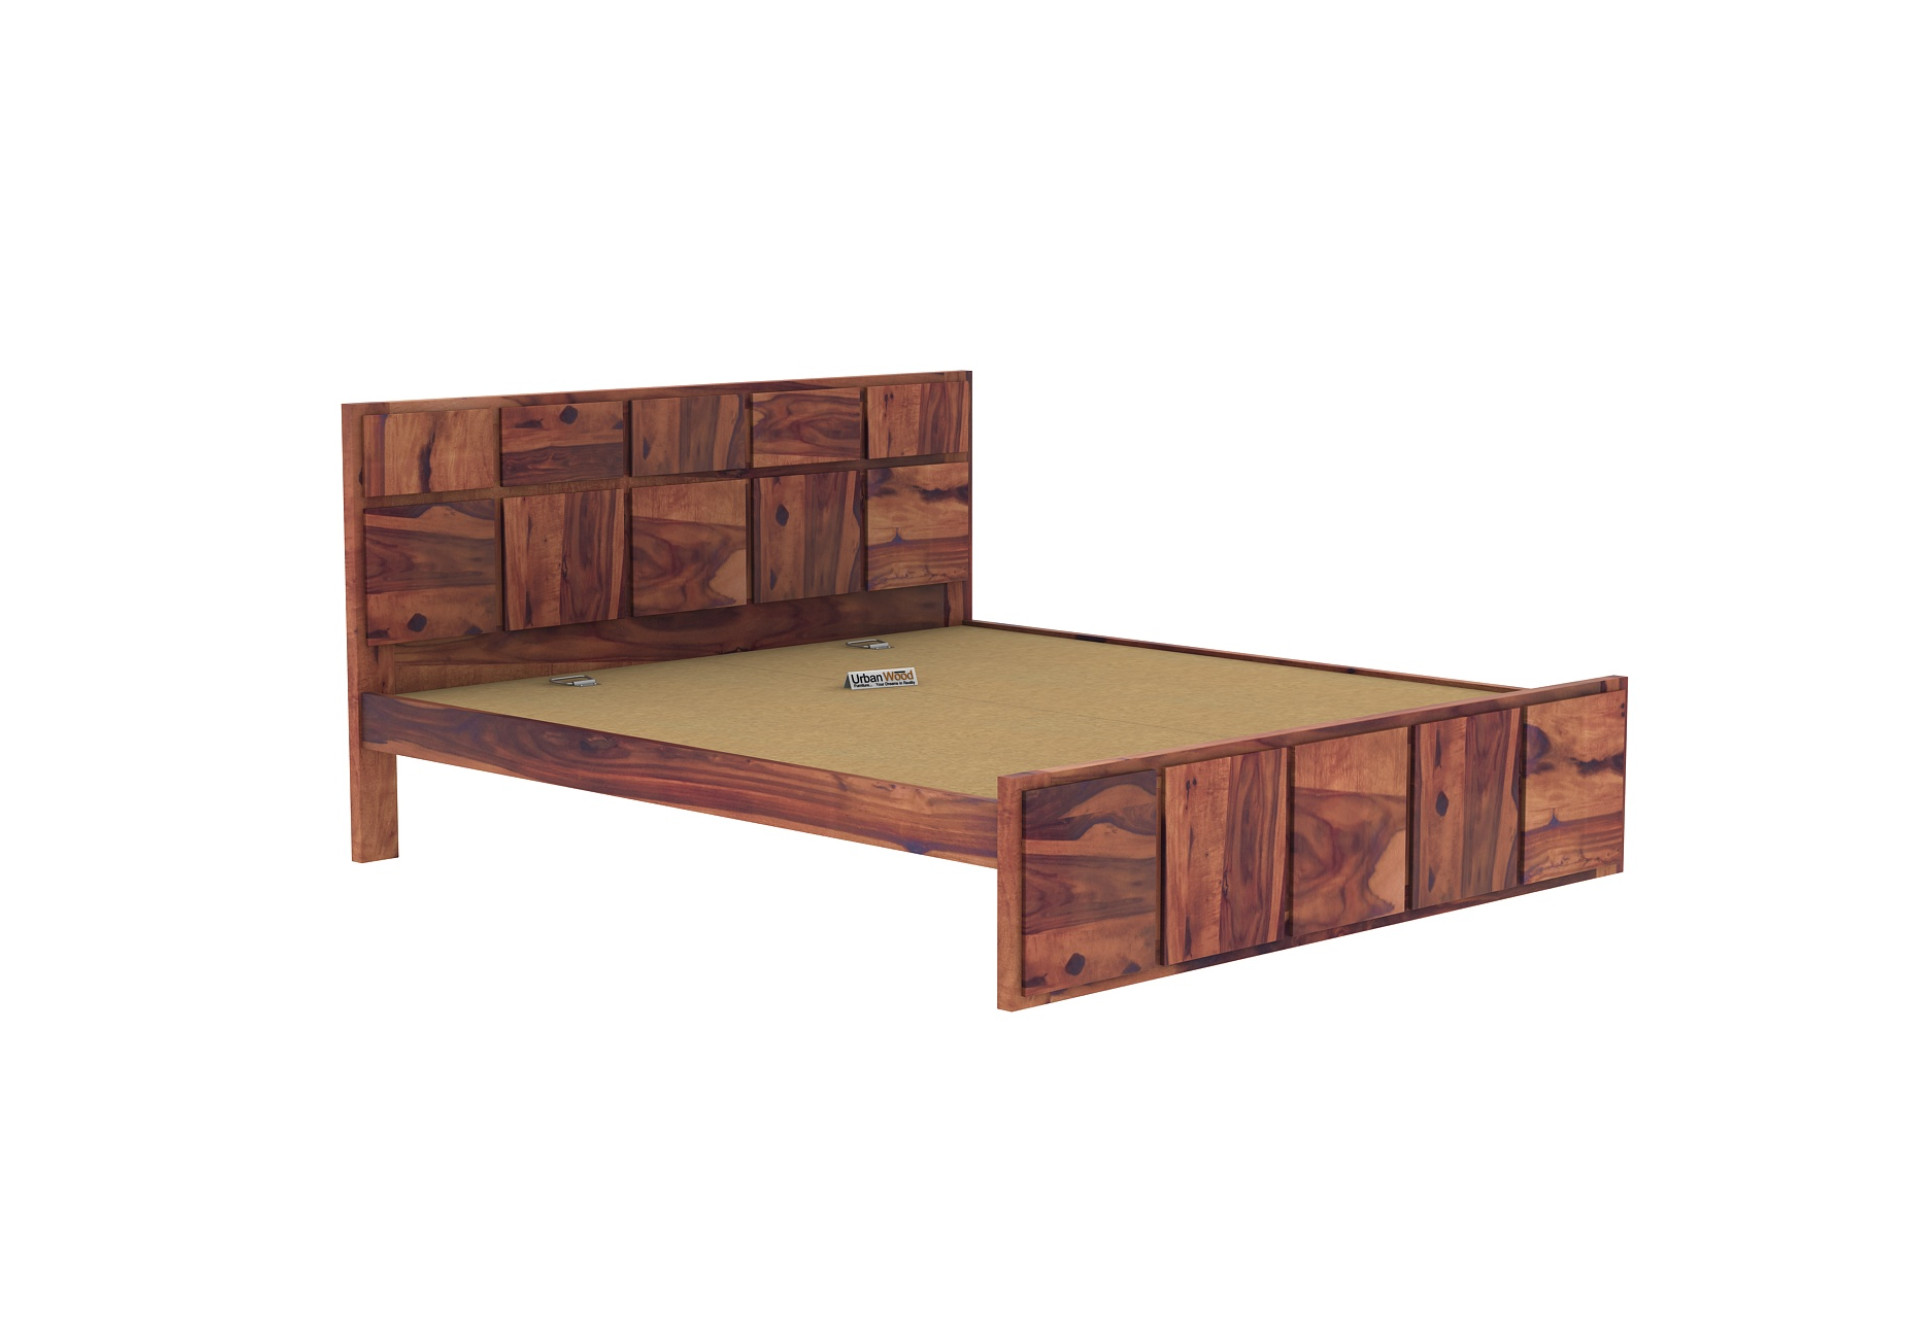 Bedswind Without Storage Bed (Queen Size, Teak Finish)